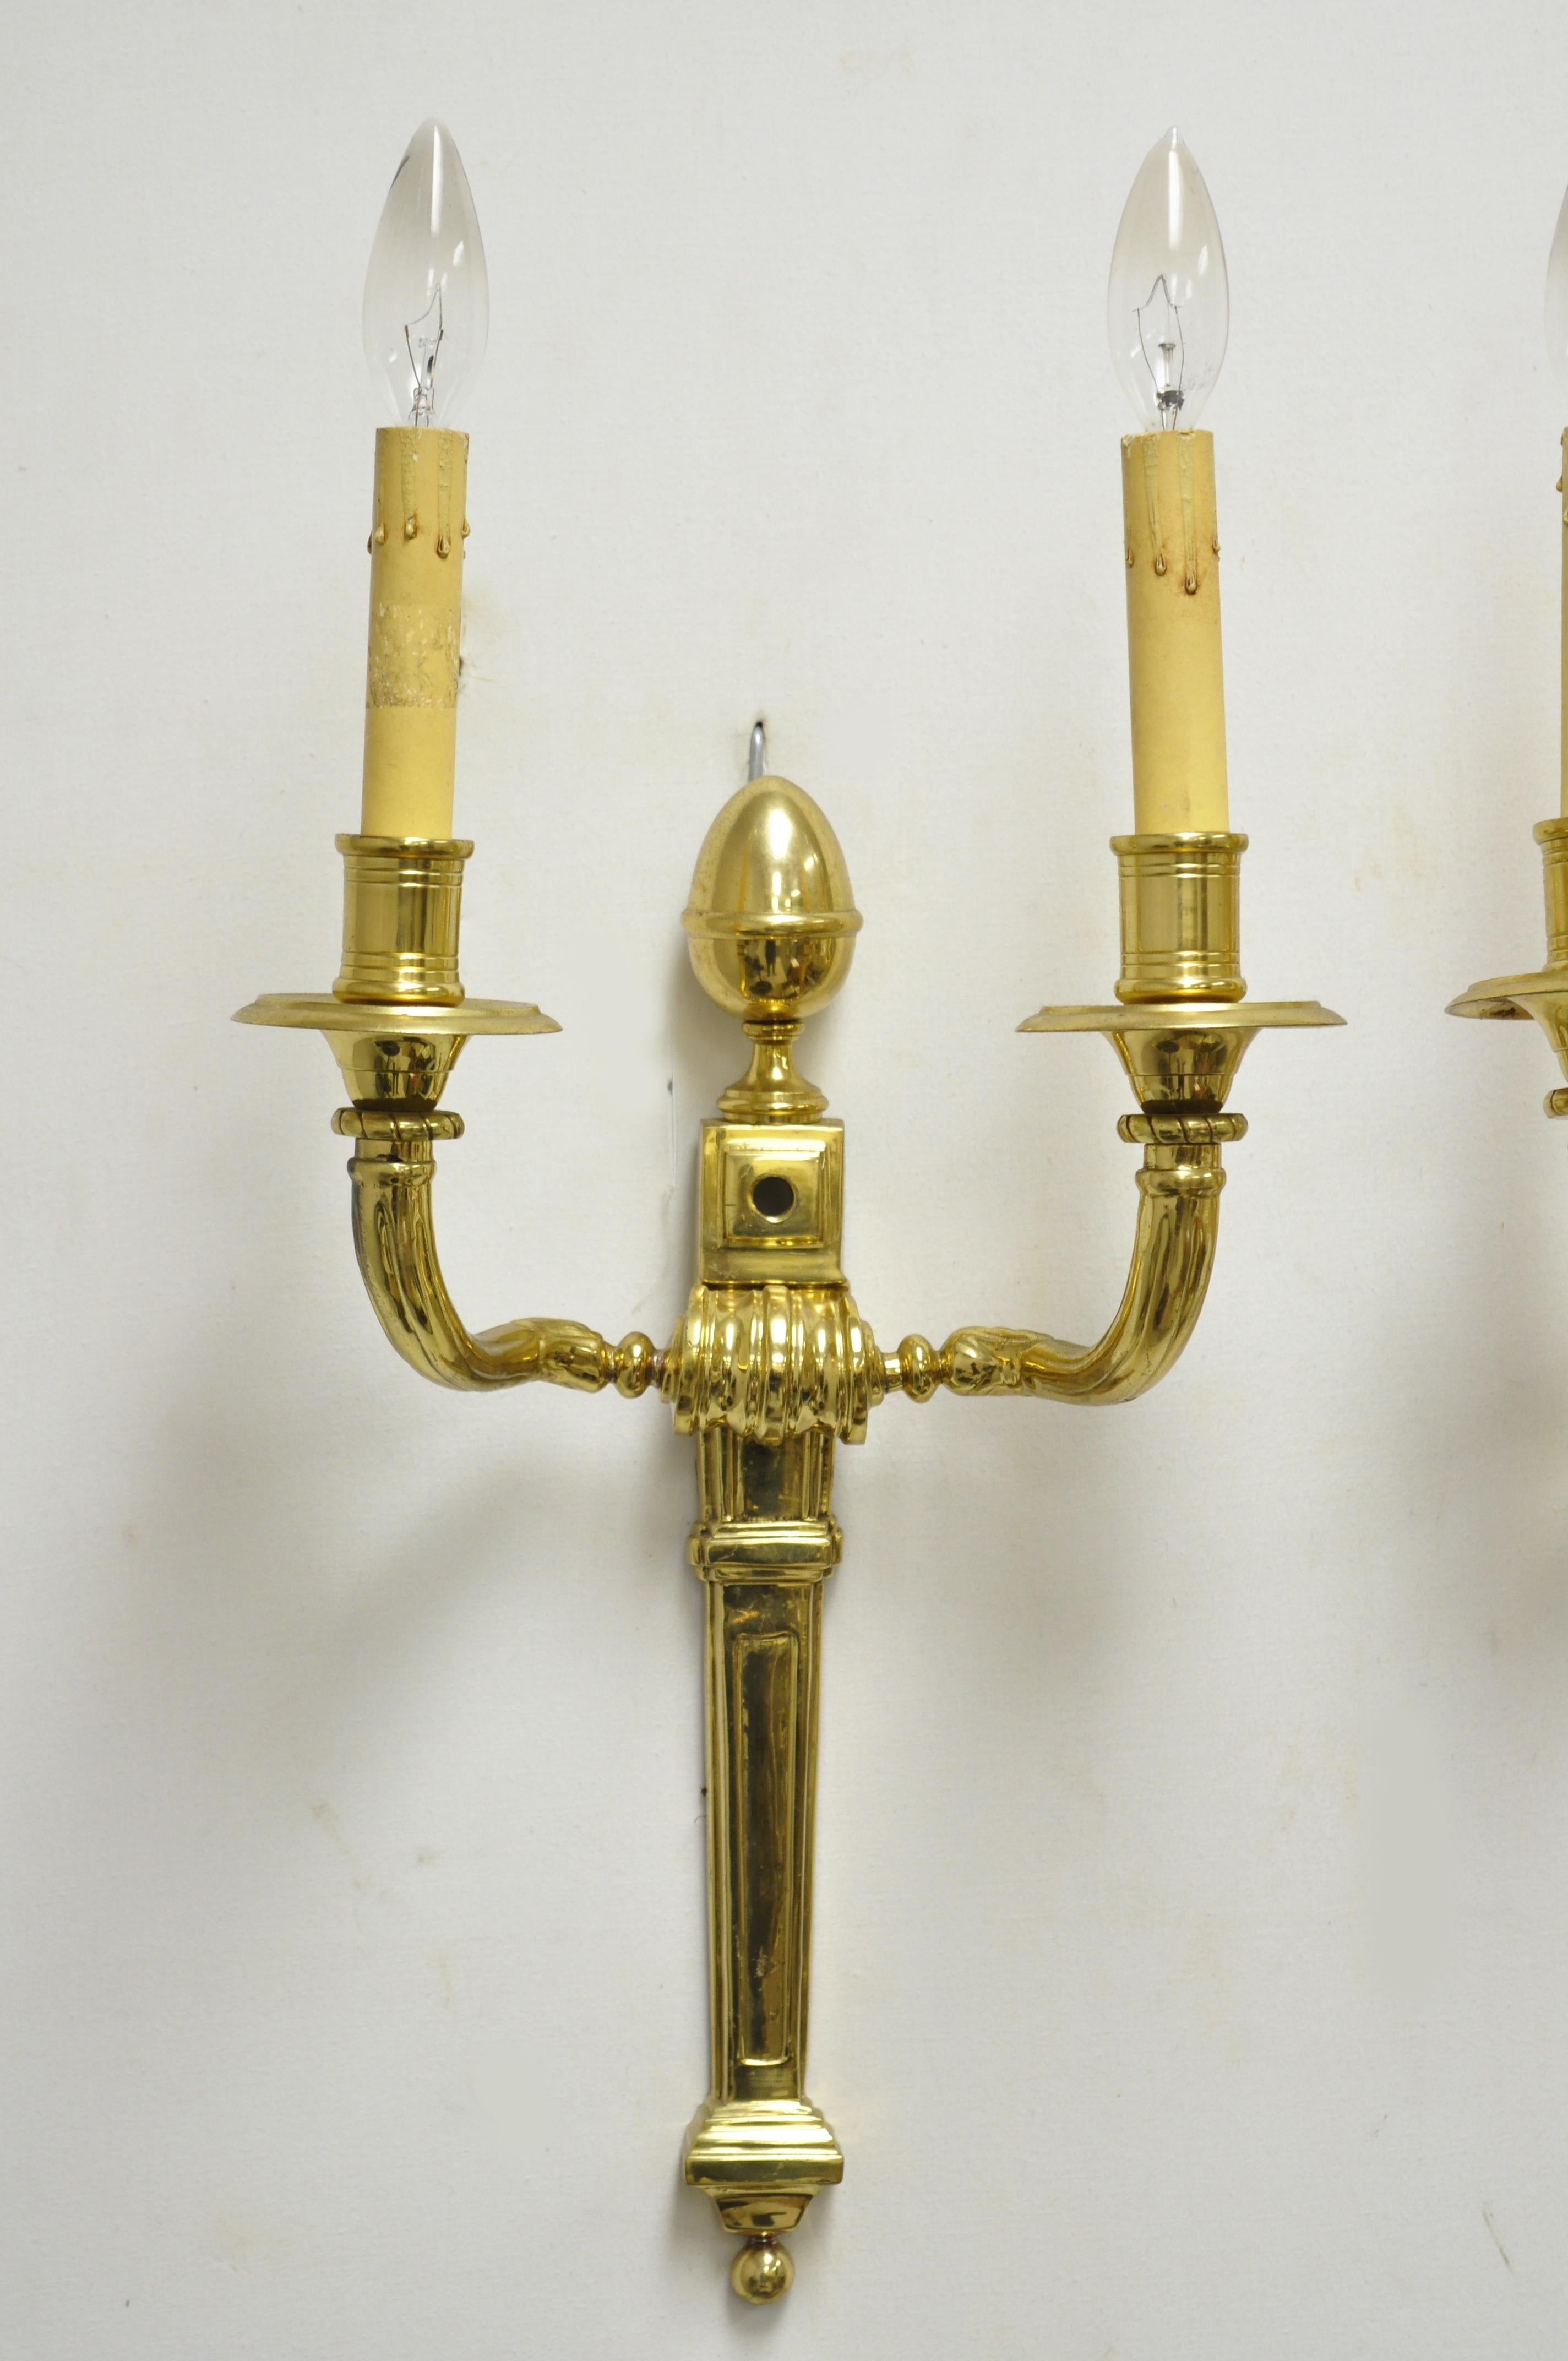 Vintage solid brass American Colonial Williamsburg lighted wall sconces - pair A, circa mid-late 20th century. Measurements: 21